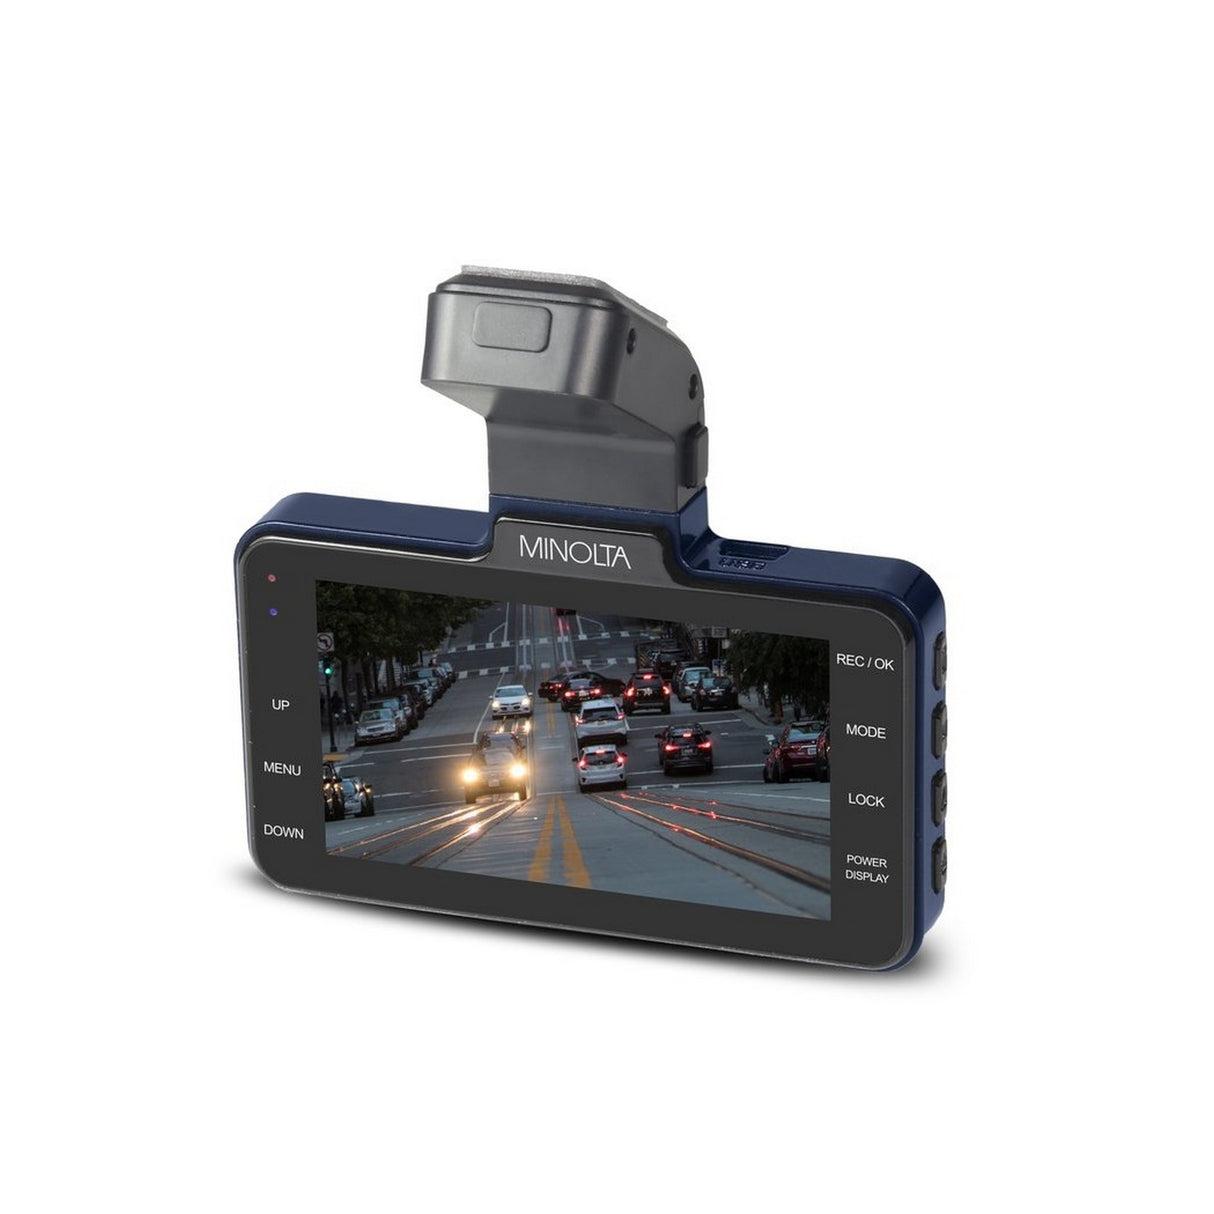 Minolta MNCD370 1080p Car Camcorder with 3.0-Inch LCD Monitor, Blue